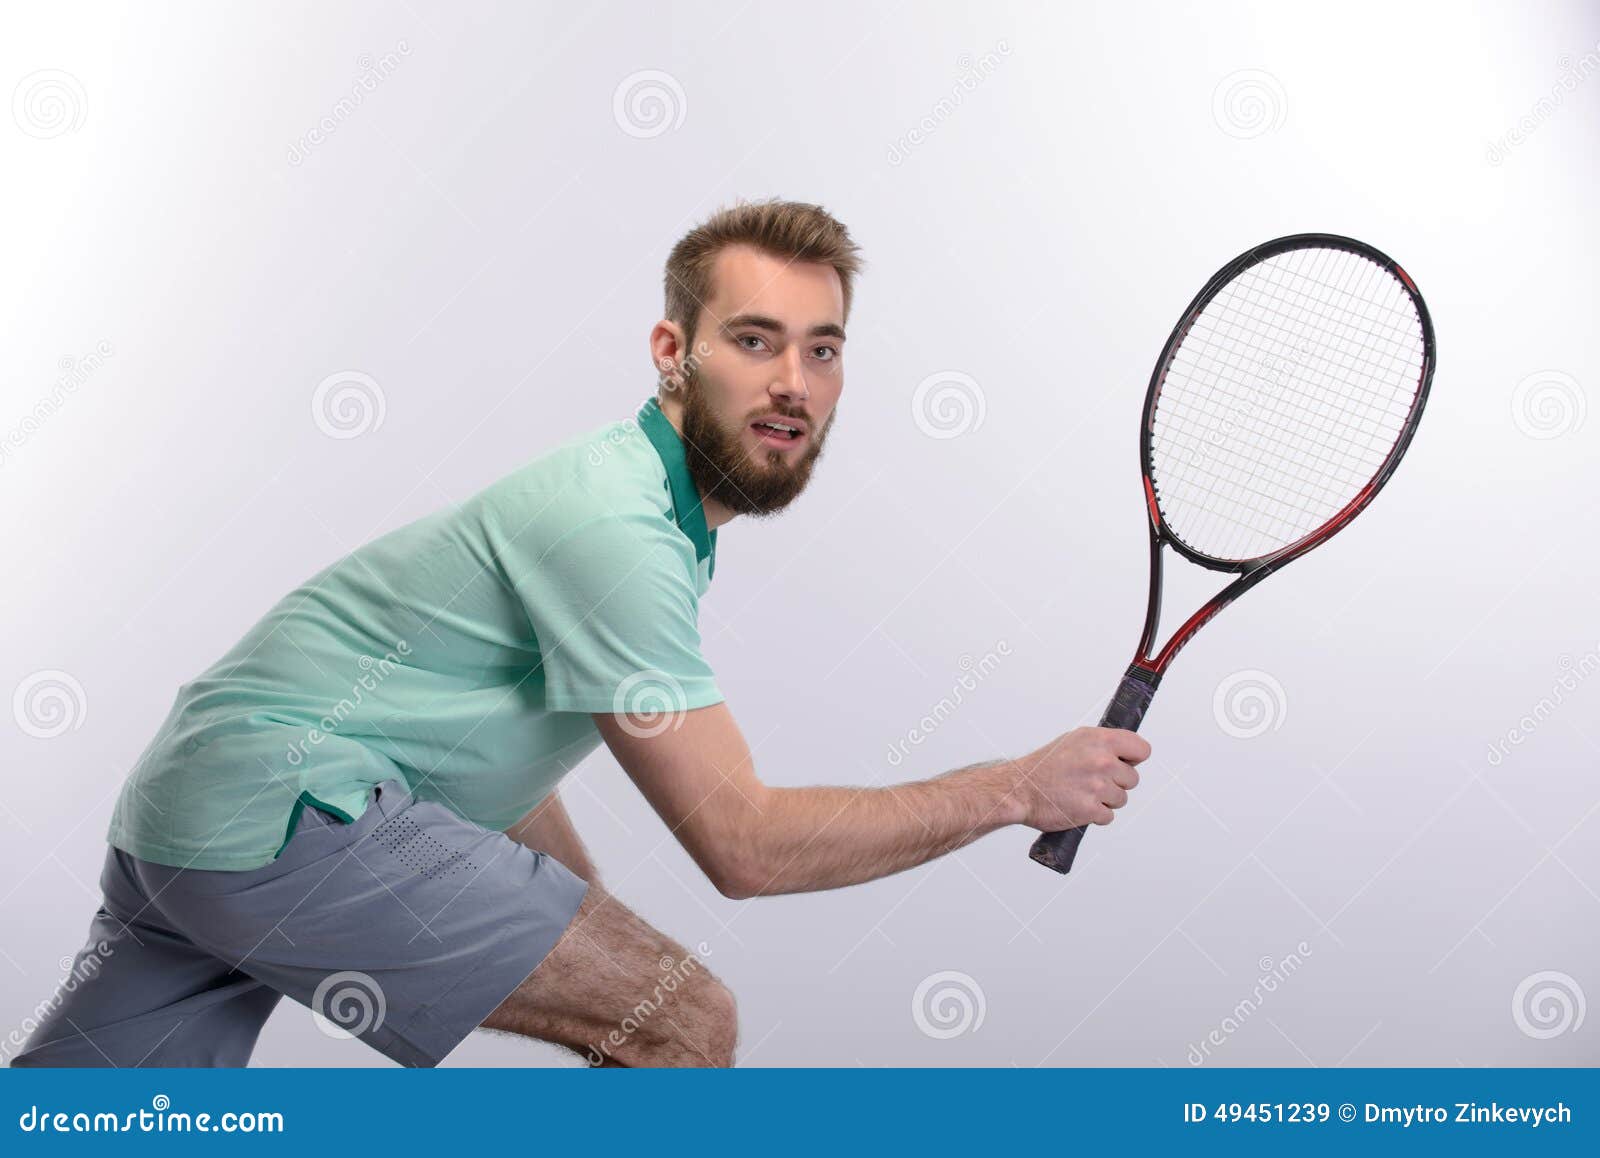 Handsome Young Man in Polo Shirt Holding Tennis Stock Image - Image of ...